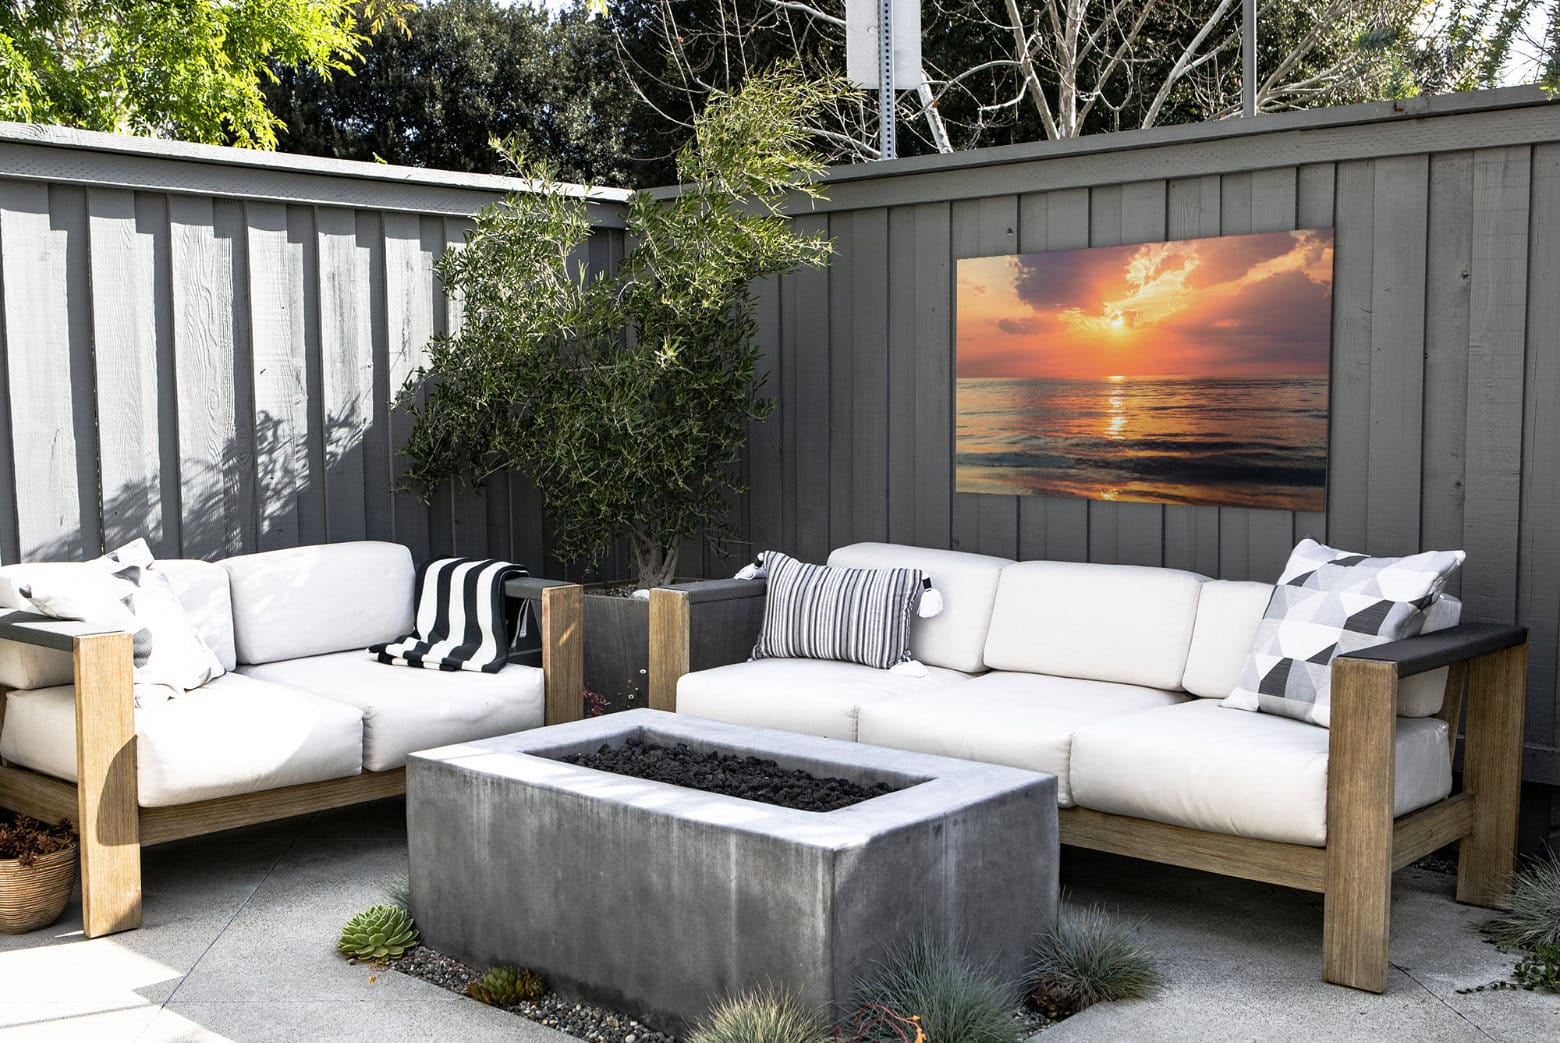 Metal Photo Print of Ocean Sunset Displayed Outdoors on a Patio 